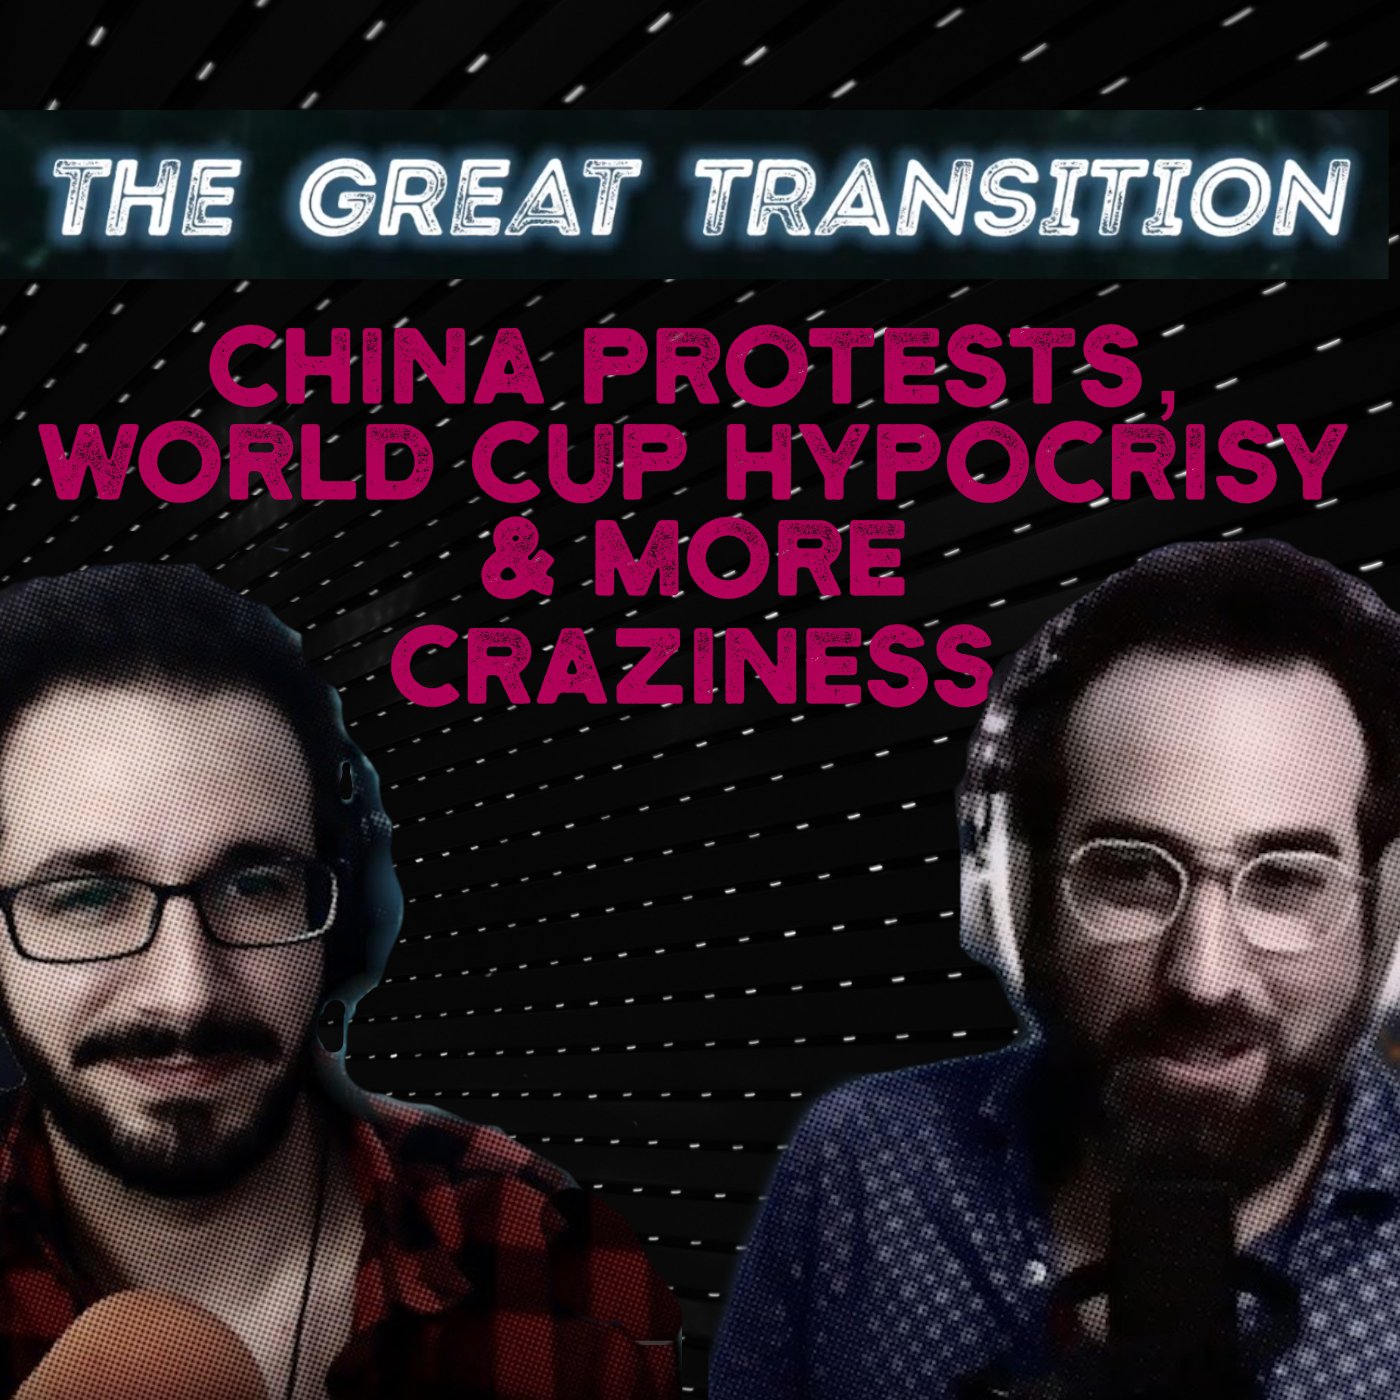 The Great Transition - China Protests, World Cup Hypocrisy & More Craziness